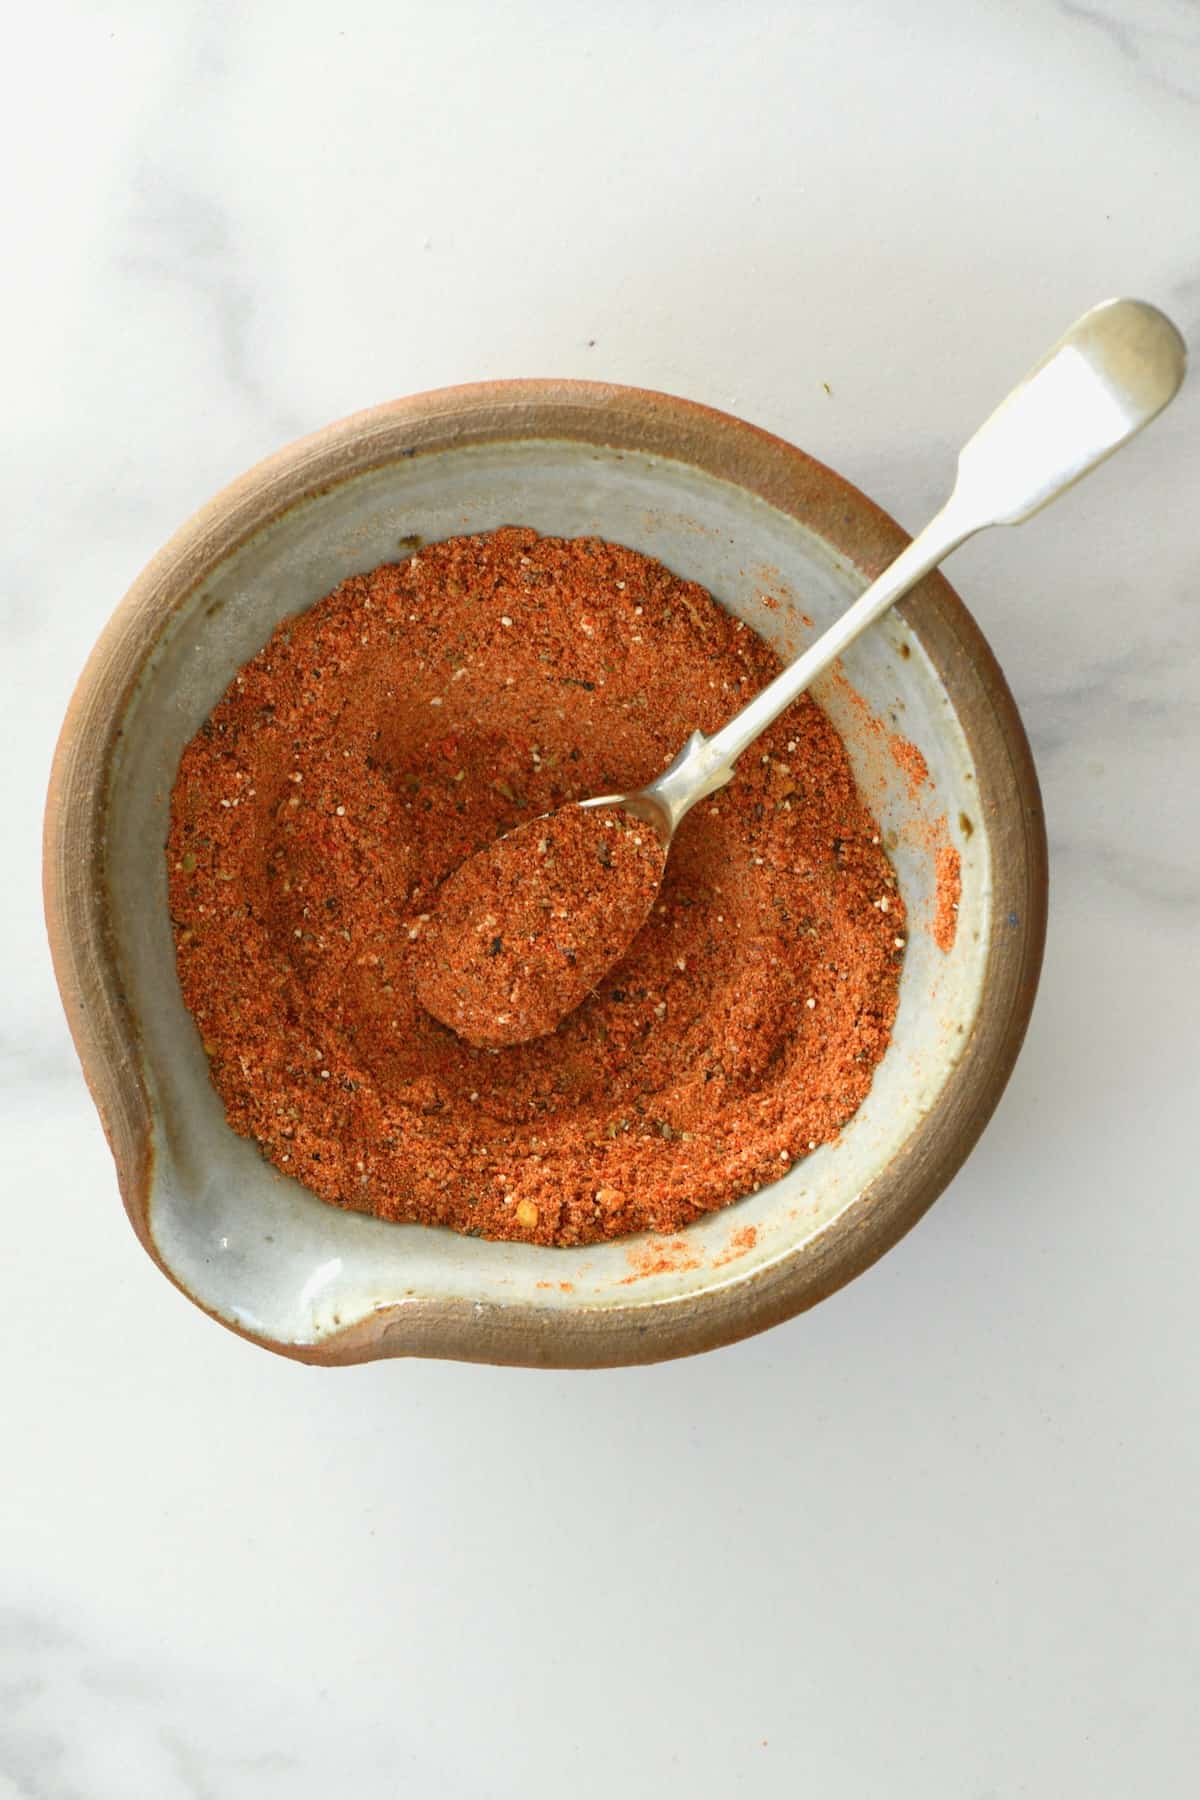 https://www.alphafoodie.com/wp-content/uploads/2022/07/Authentic-Taco-Seasoning-Spices-A-spoonful-of-taco-seasoning-in-a-bowl.jpeg